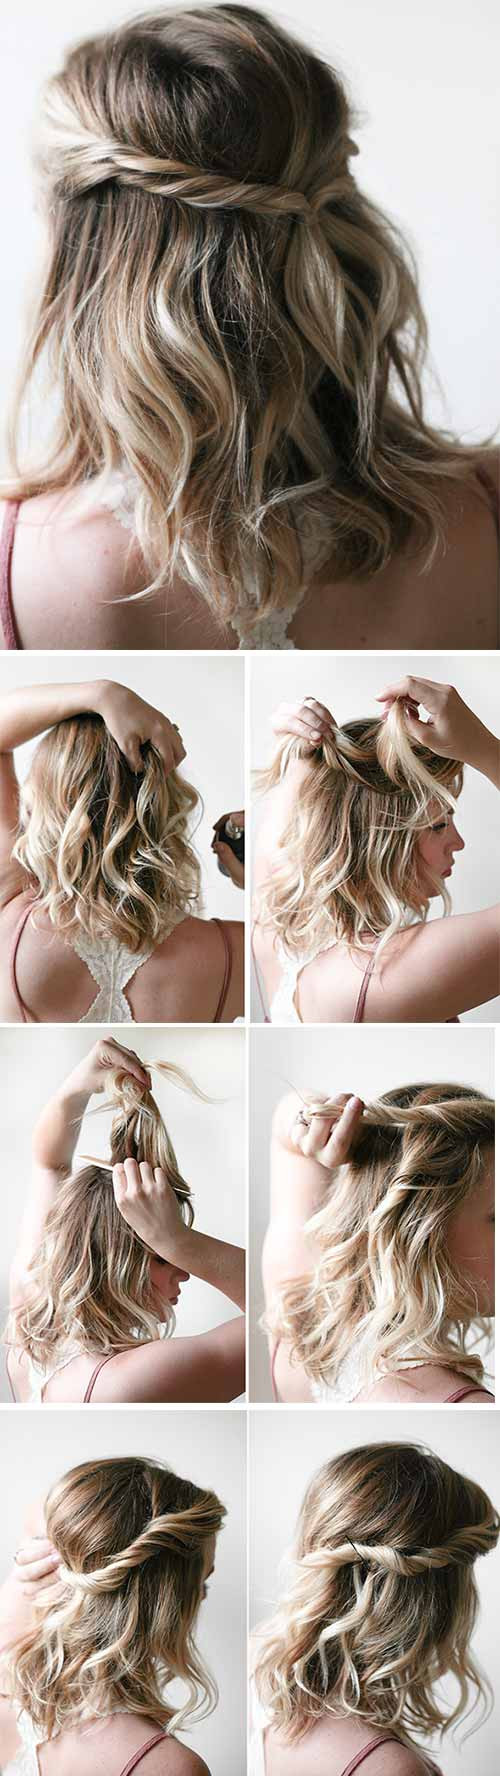 Quick DIY Hairstyles
 20 Incredible DIY Short Hairstyles A Step By Step Guide